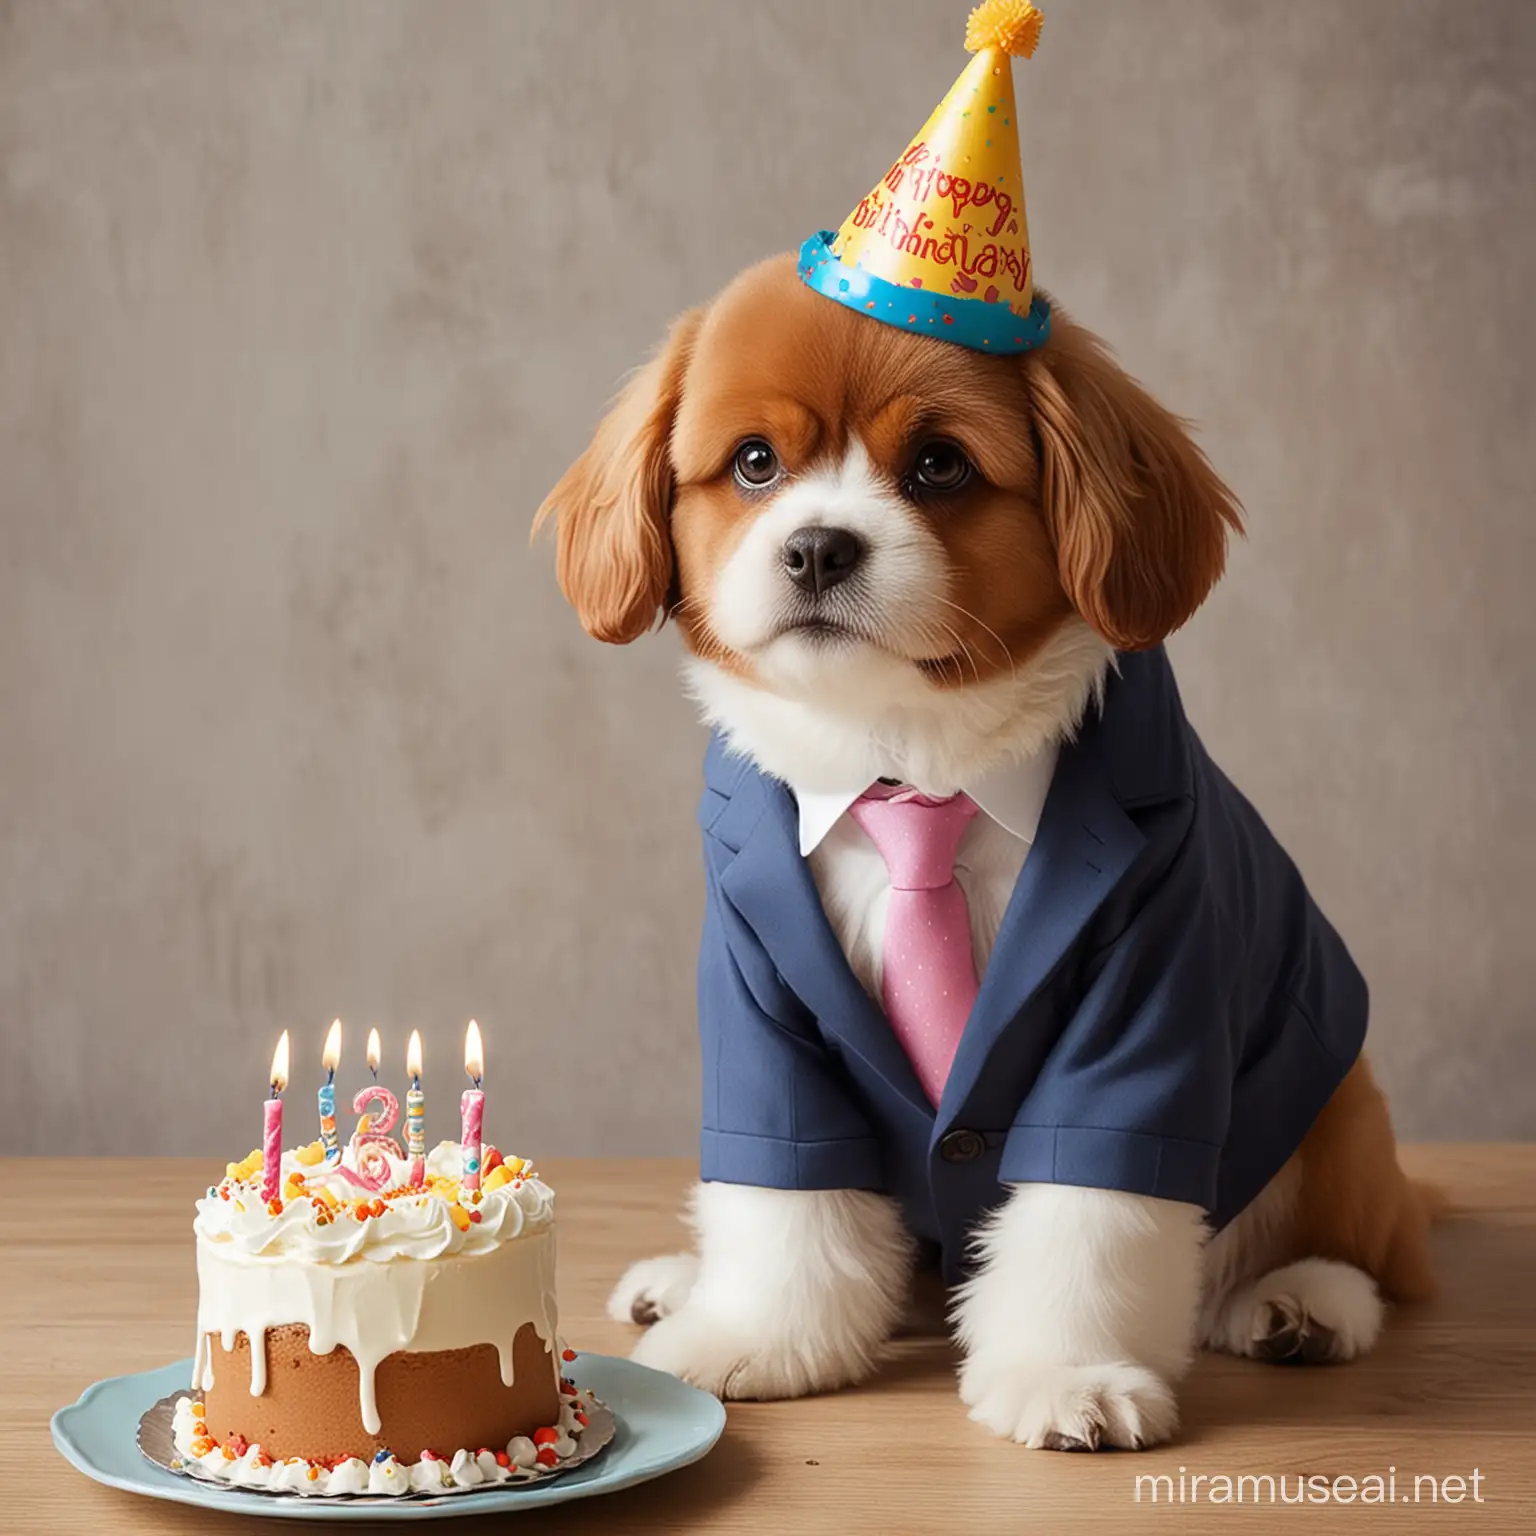 Make a dog with a suit. Add birthday hat a cake. Celebrate birthday